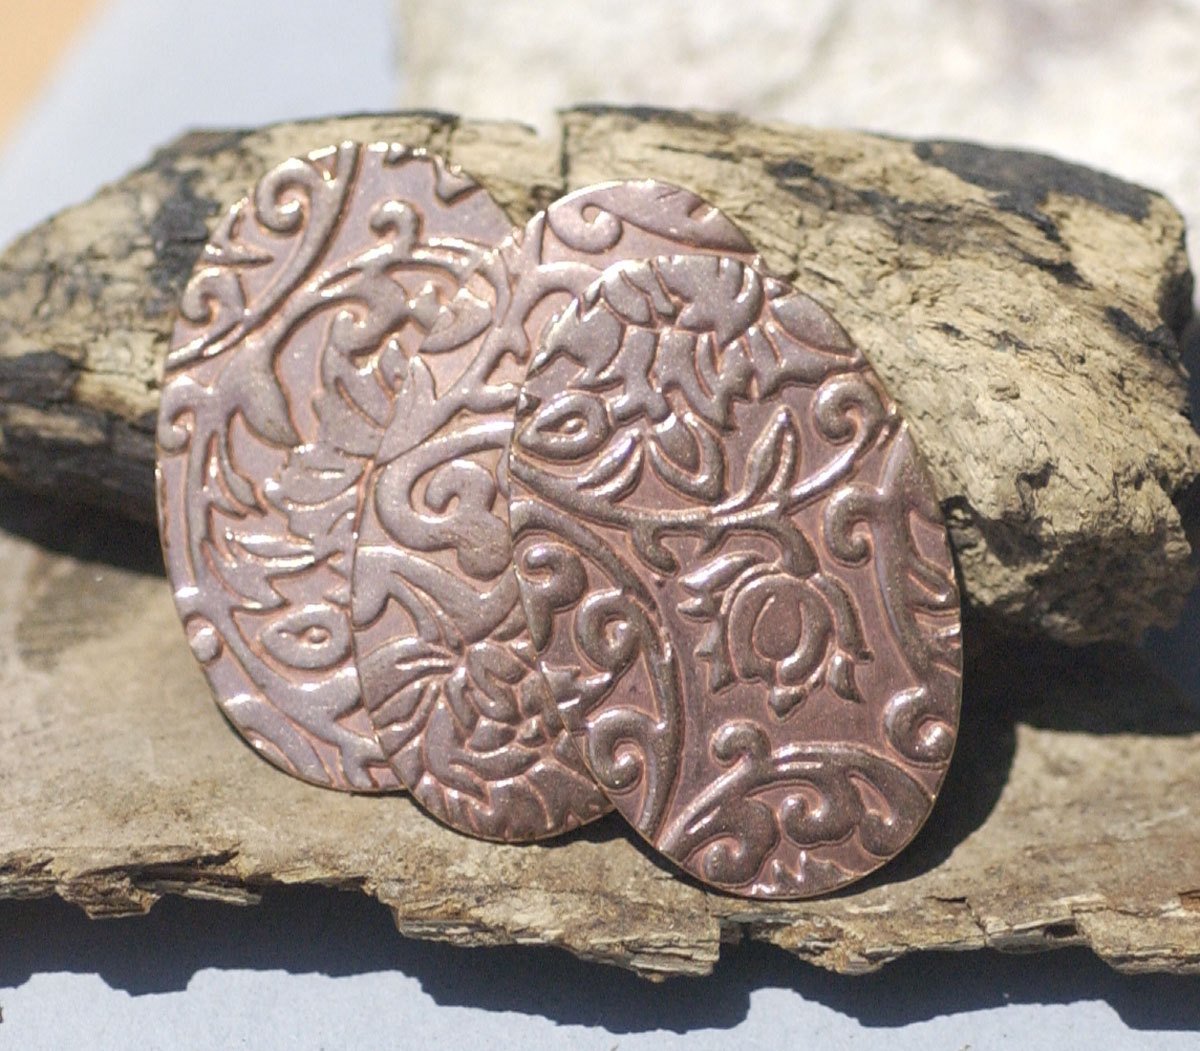 Lotus Flower Pattern Oval 34mm x 22mm  Blanks Shape for Enameling Stamping Texturing Variety of Metals